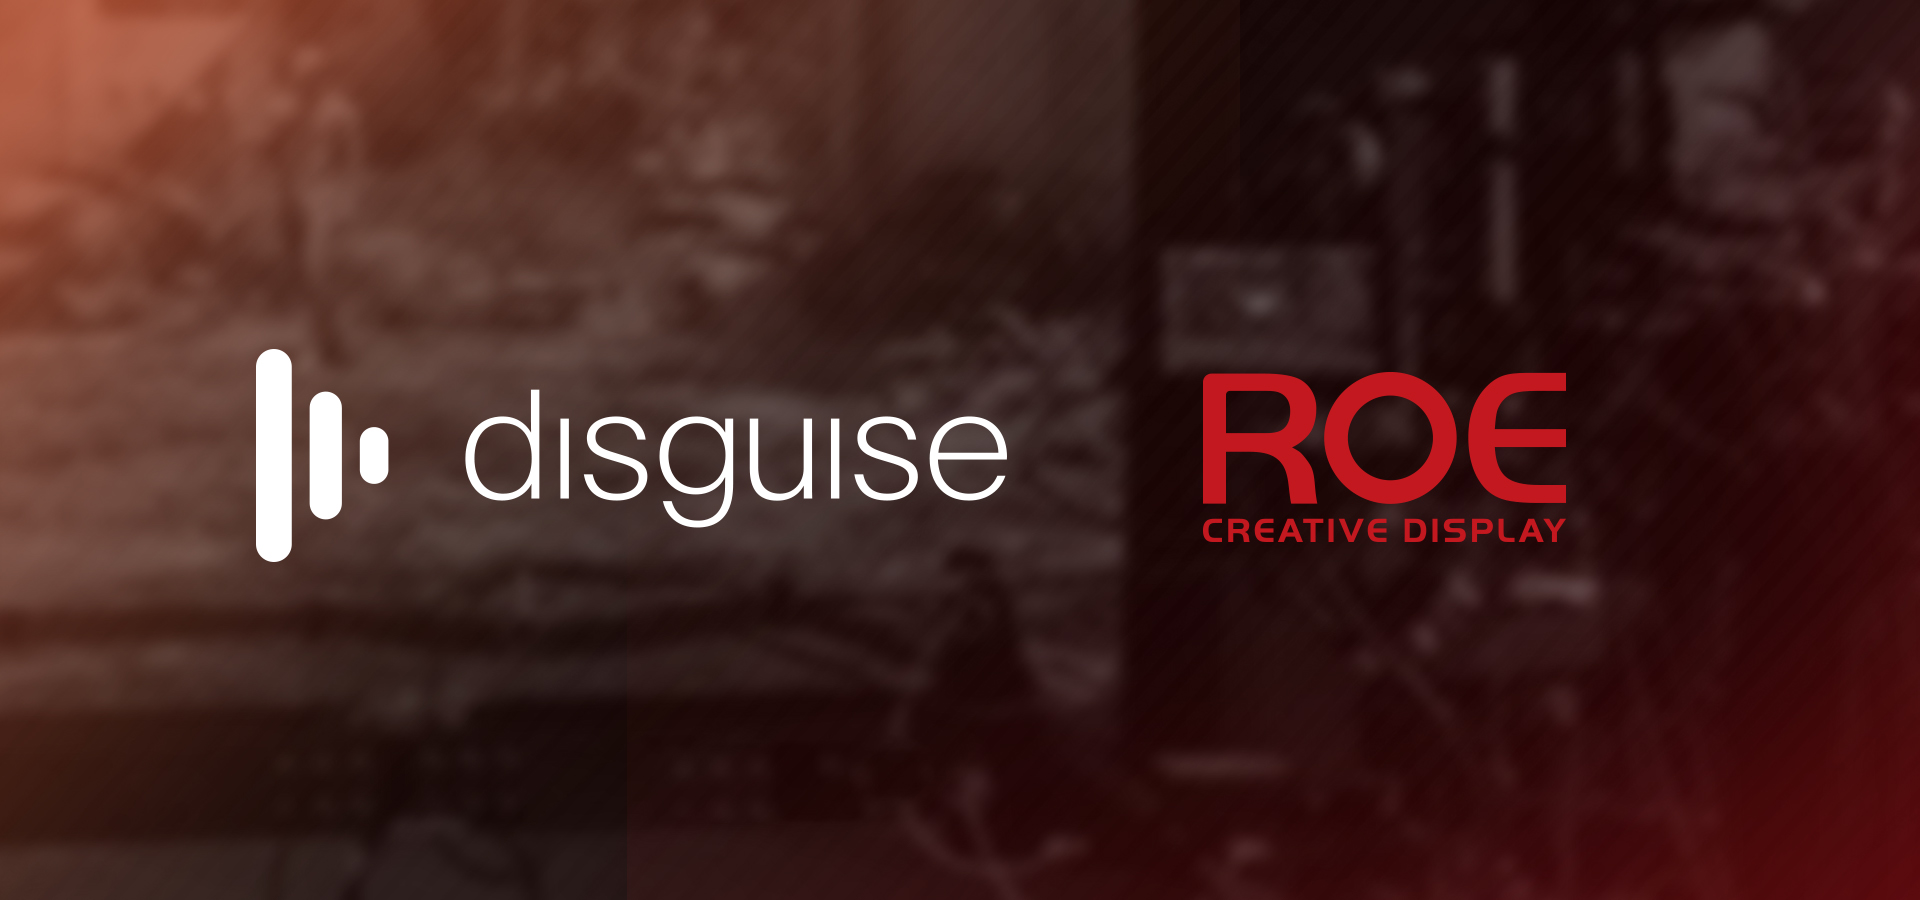 disguise - roevisual logo banner